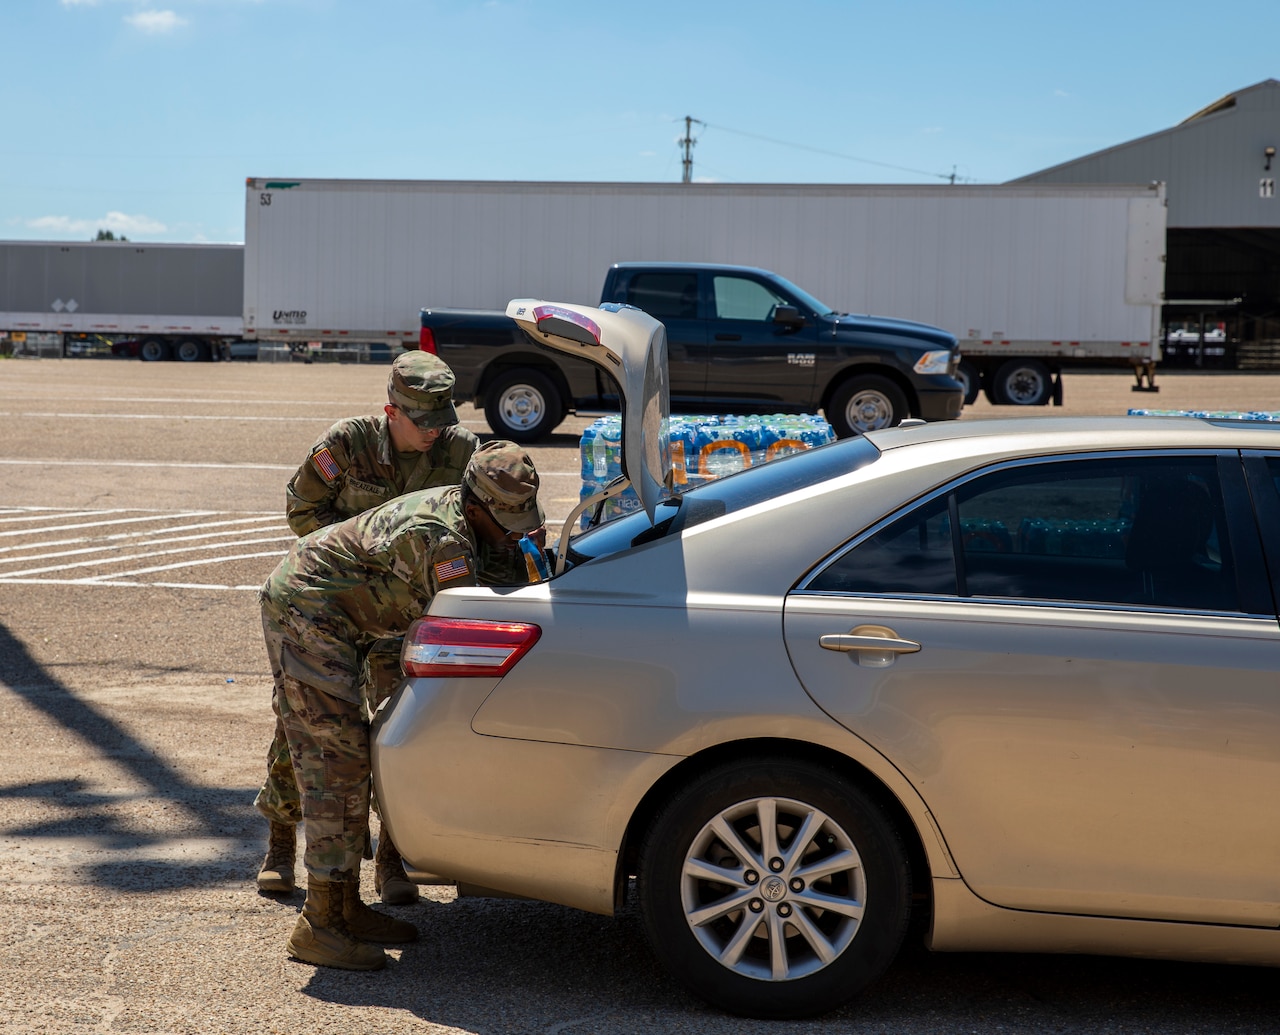 Two soldiers place water in the trunk of a car.